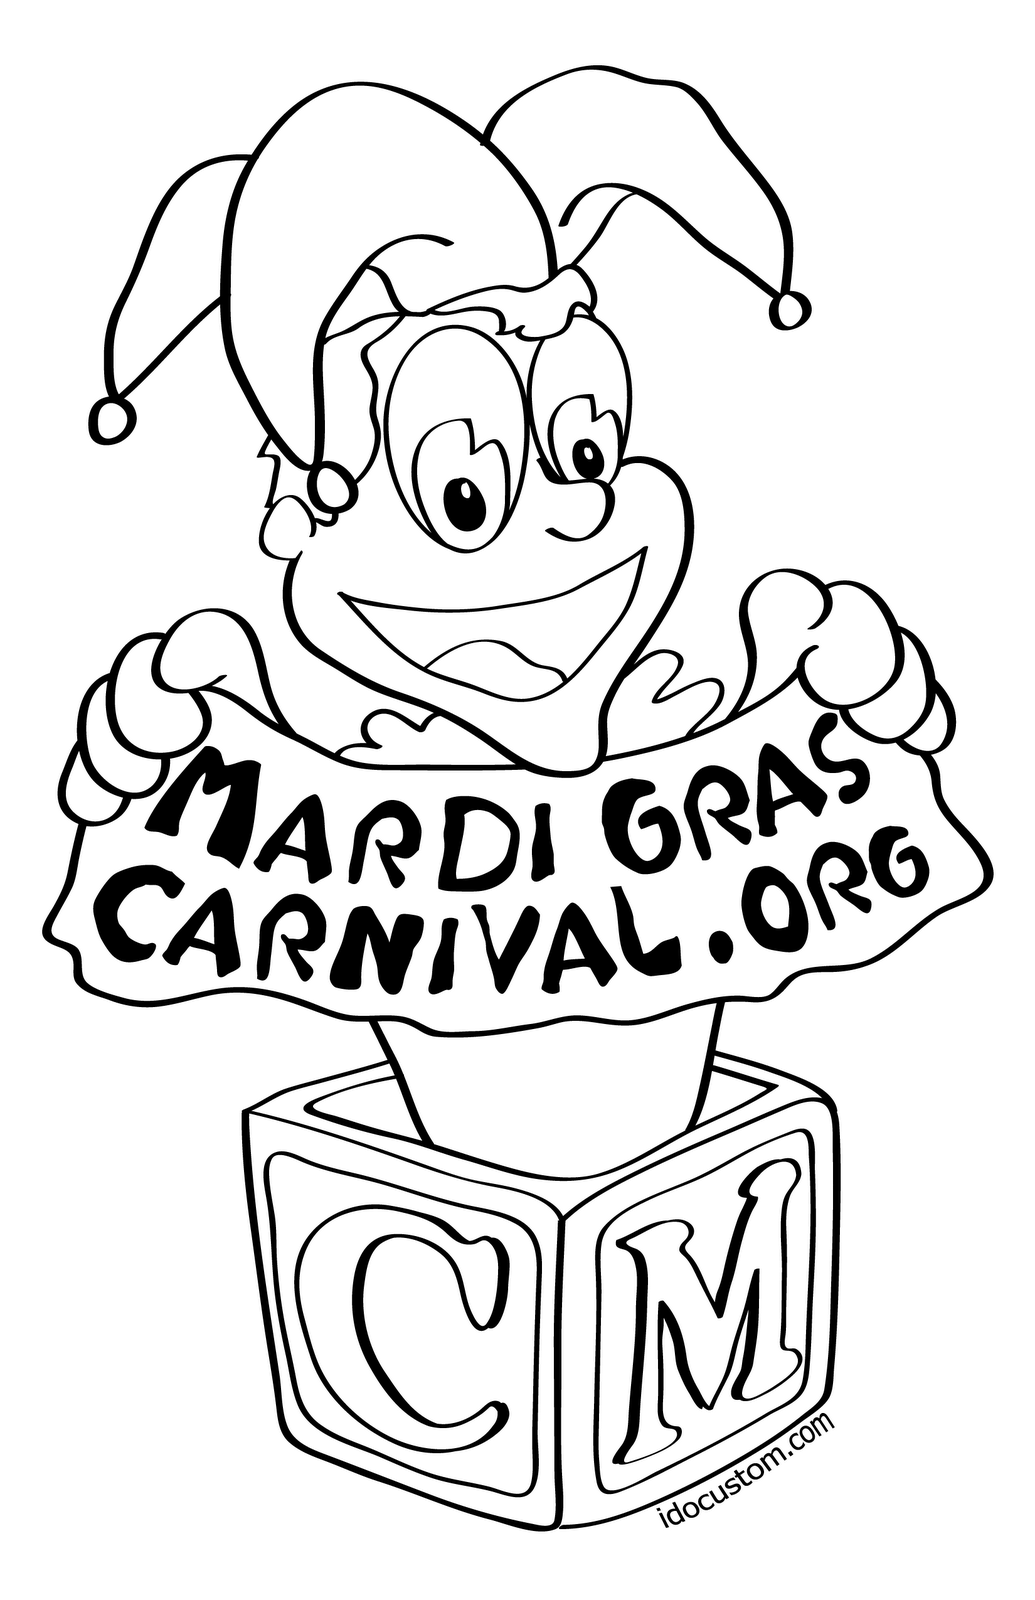 Download Mardi Gras #60727 (Holidays and Special occasions) - Printable coloring pages